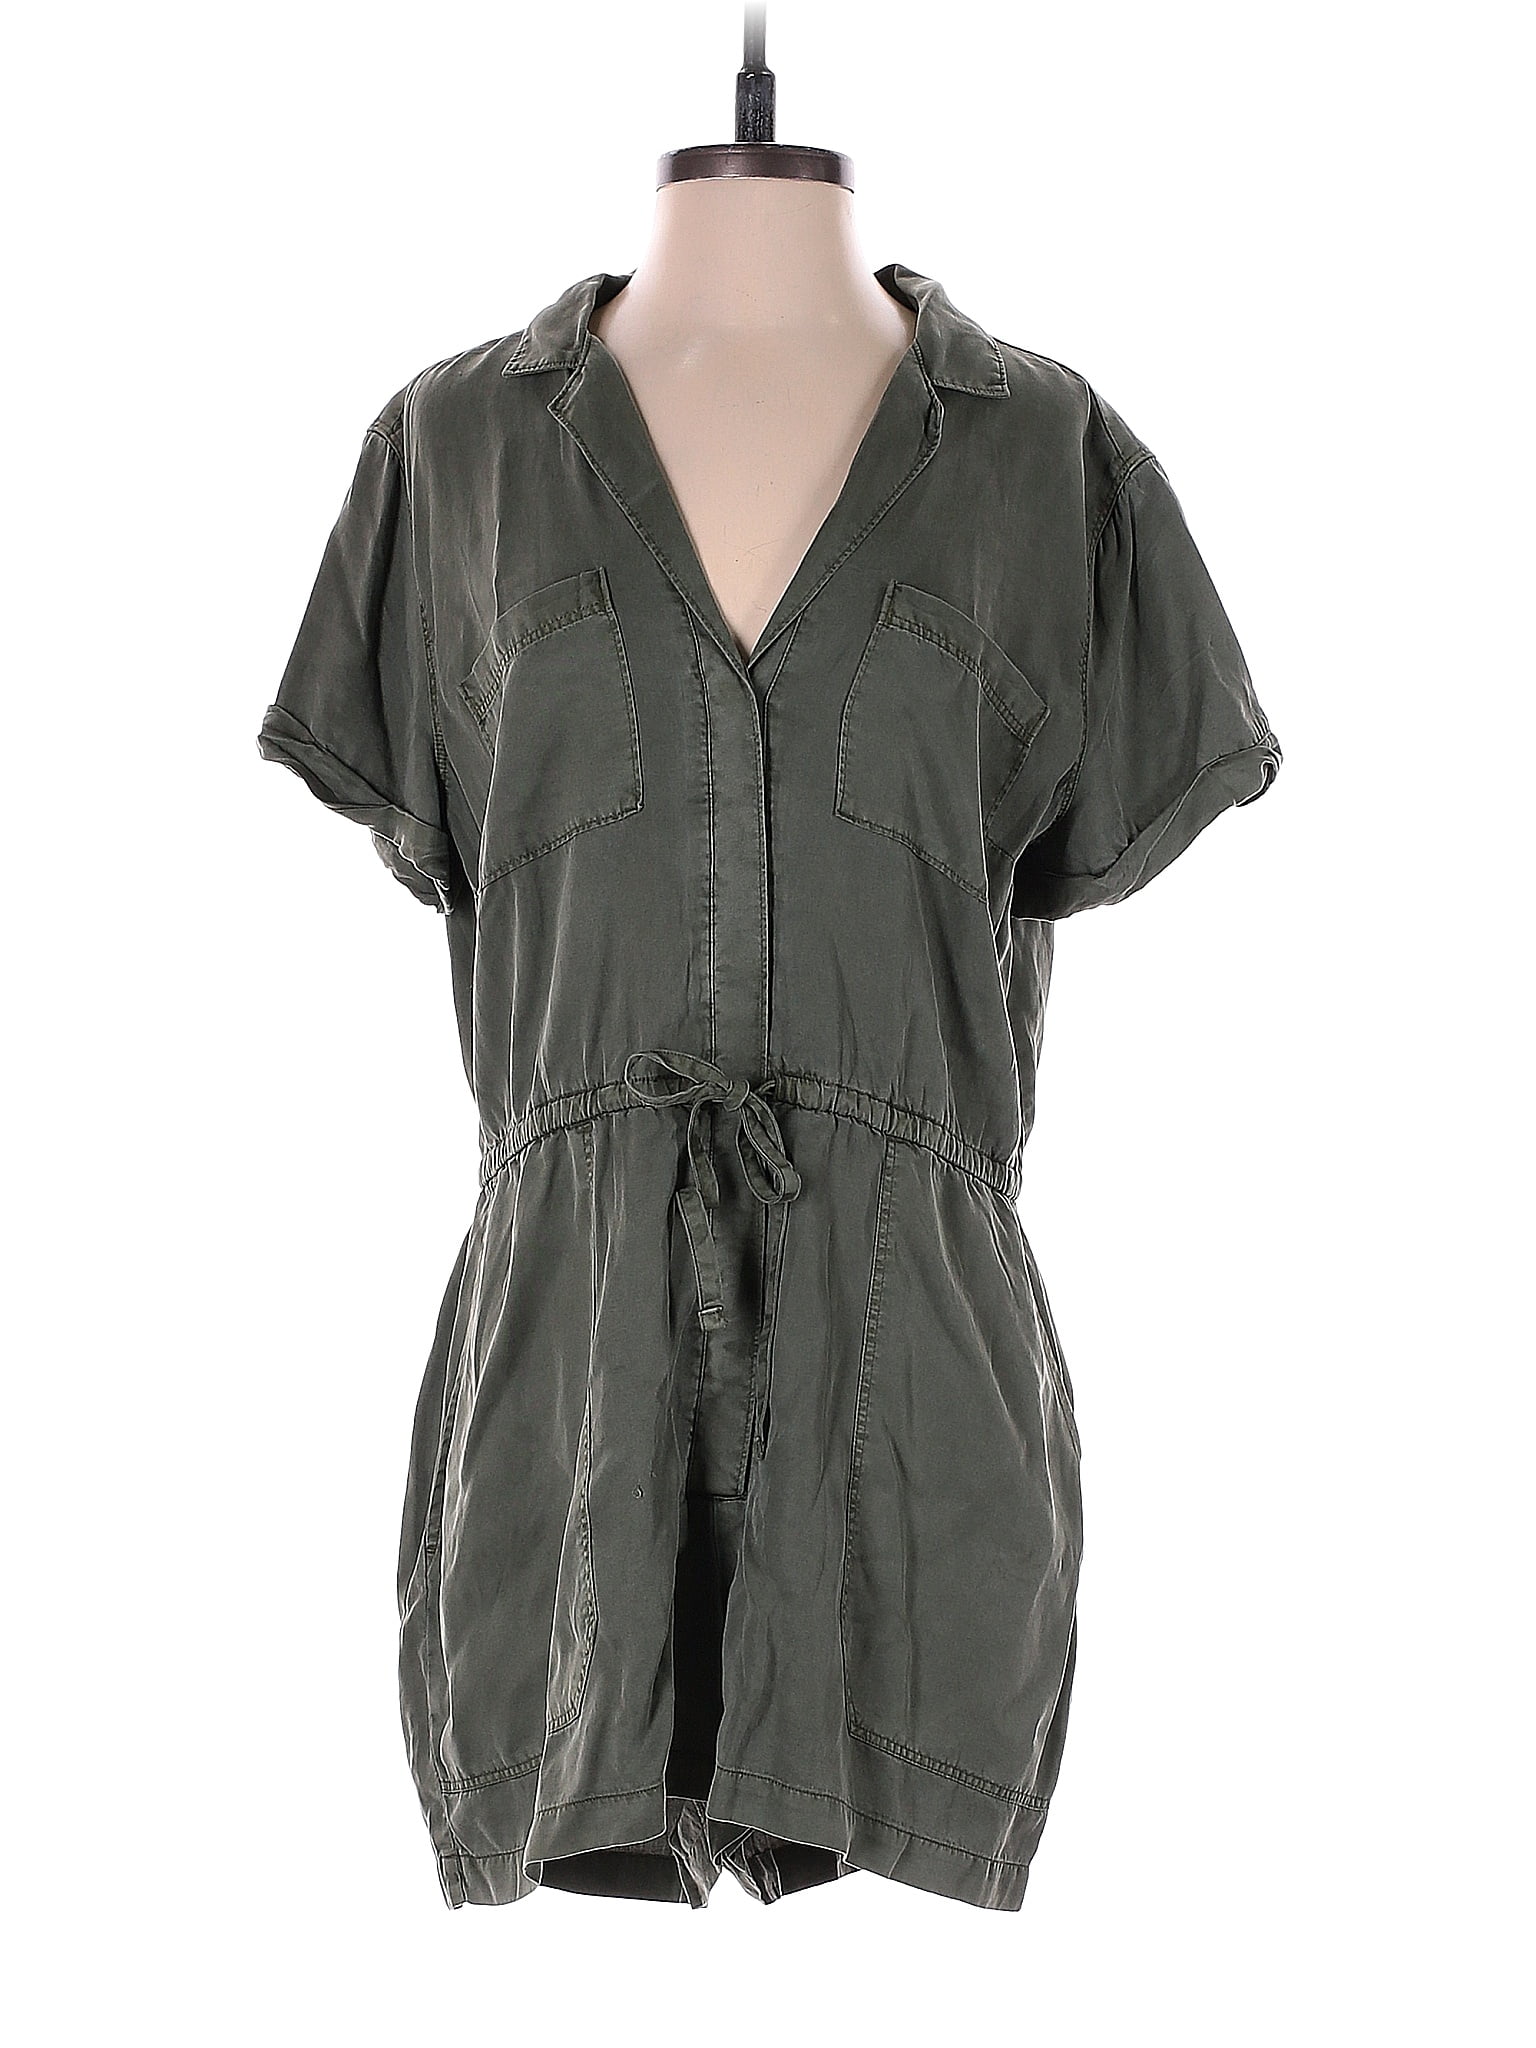 Abercrombie & Fitch 100% Lyocell Solid Gray Romper Size L - 61% off ...